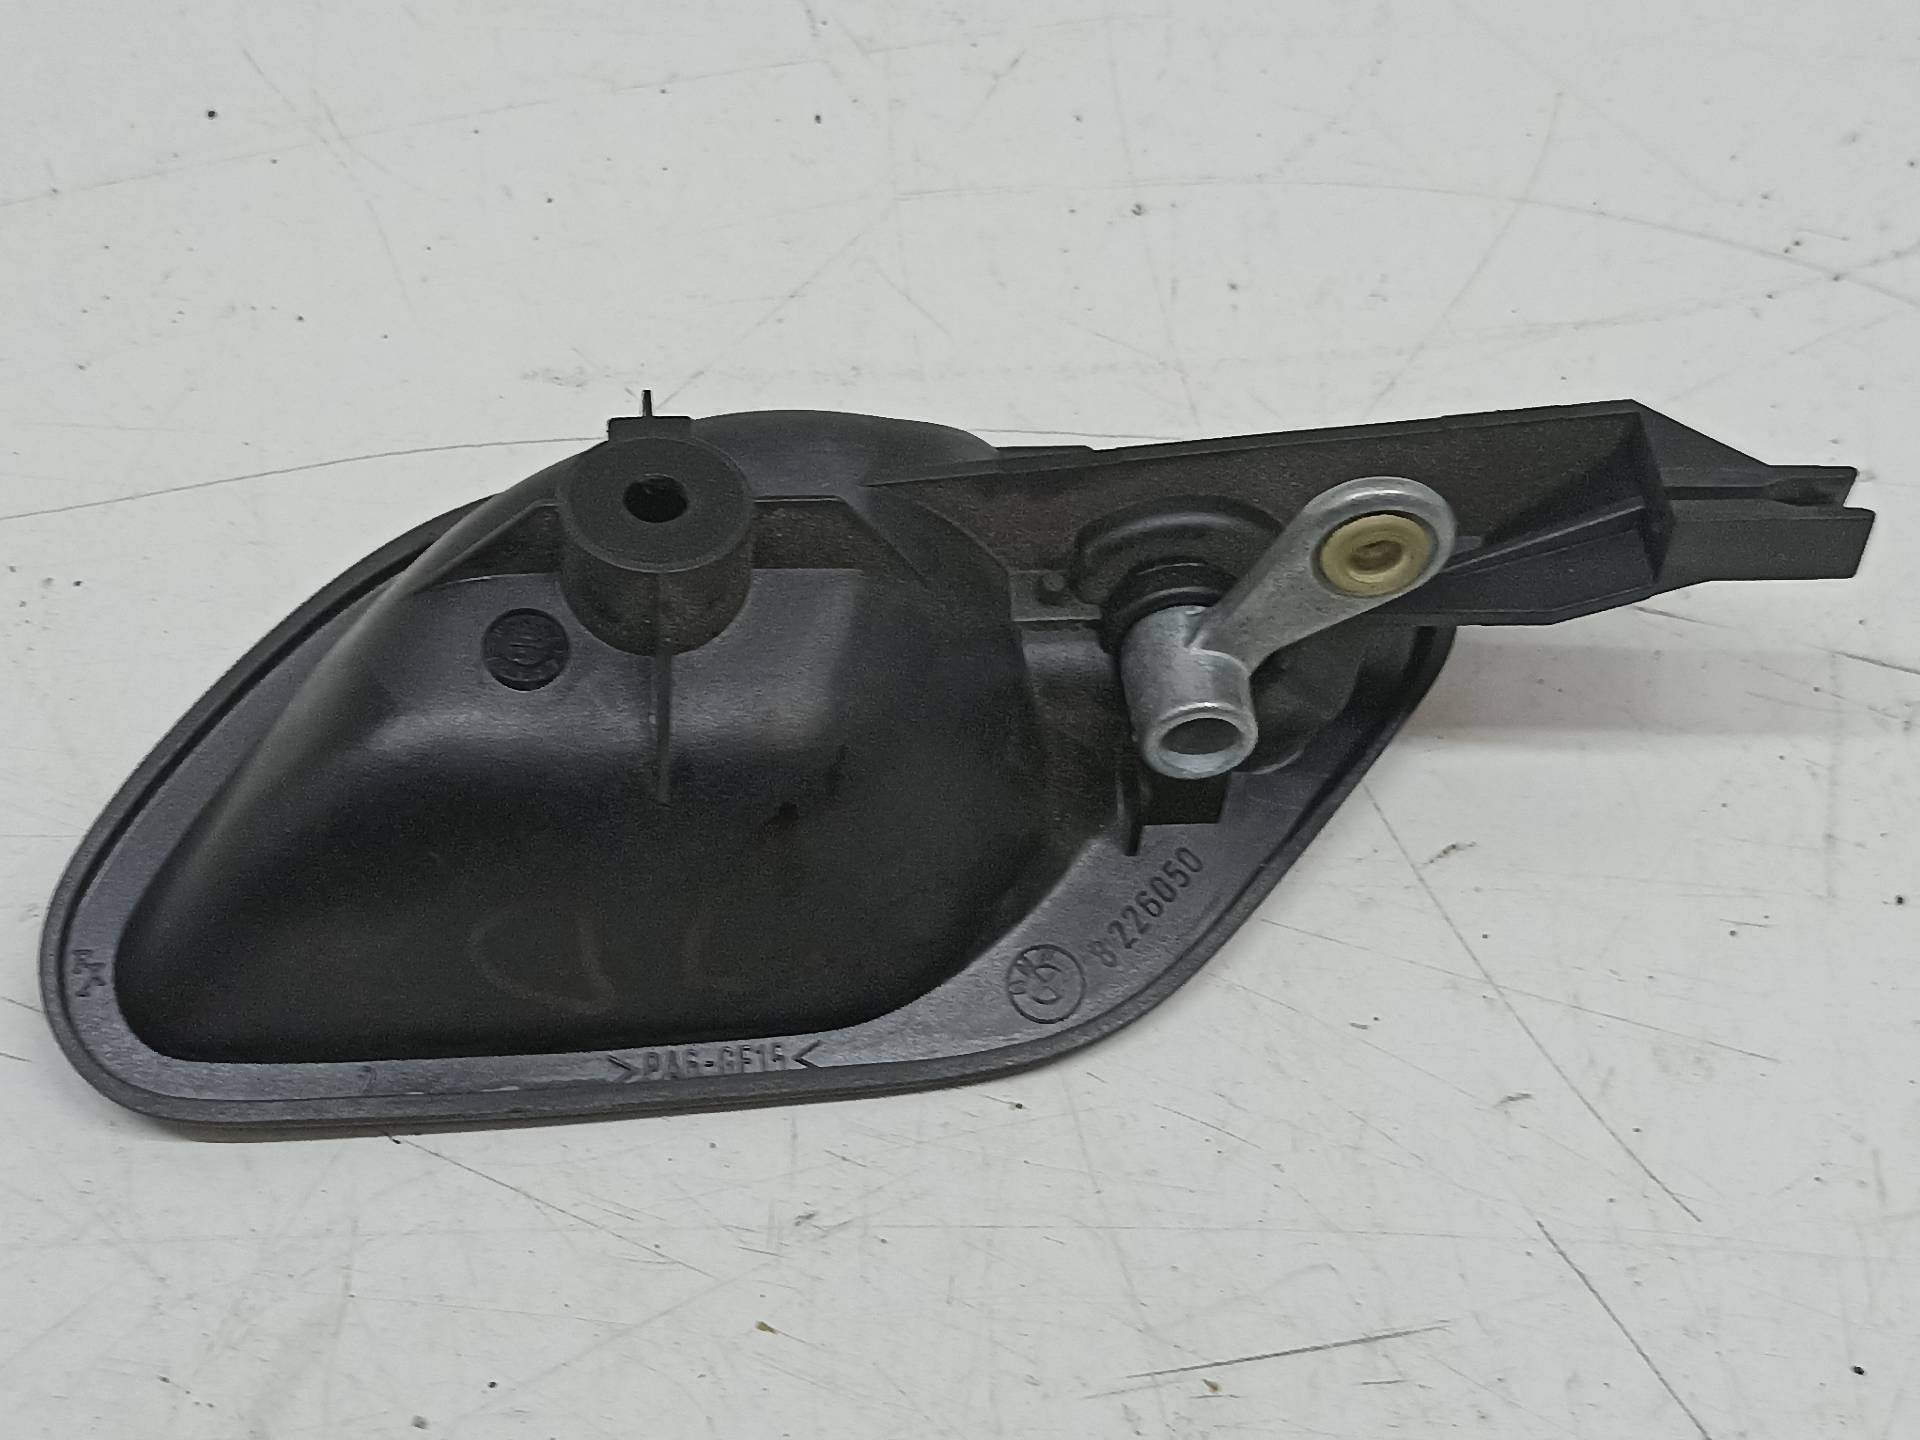 OPEL 5 Series E39 (1995-2004) Other Interior Parts 8226050 24315997